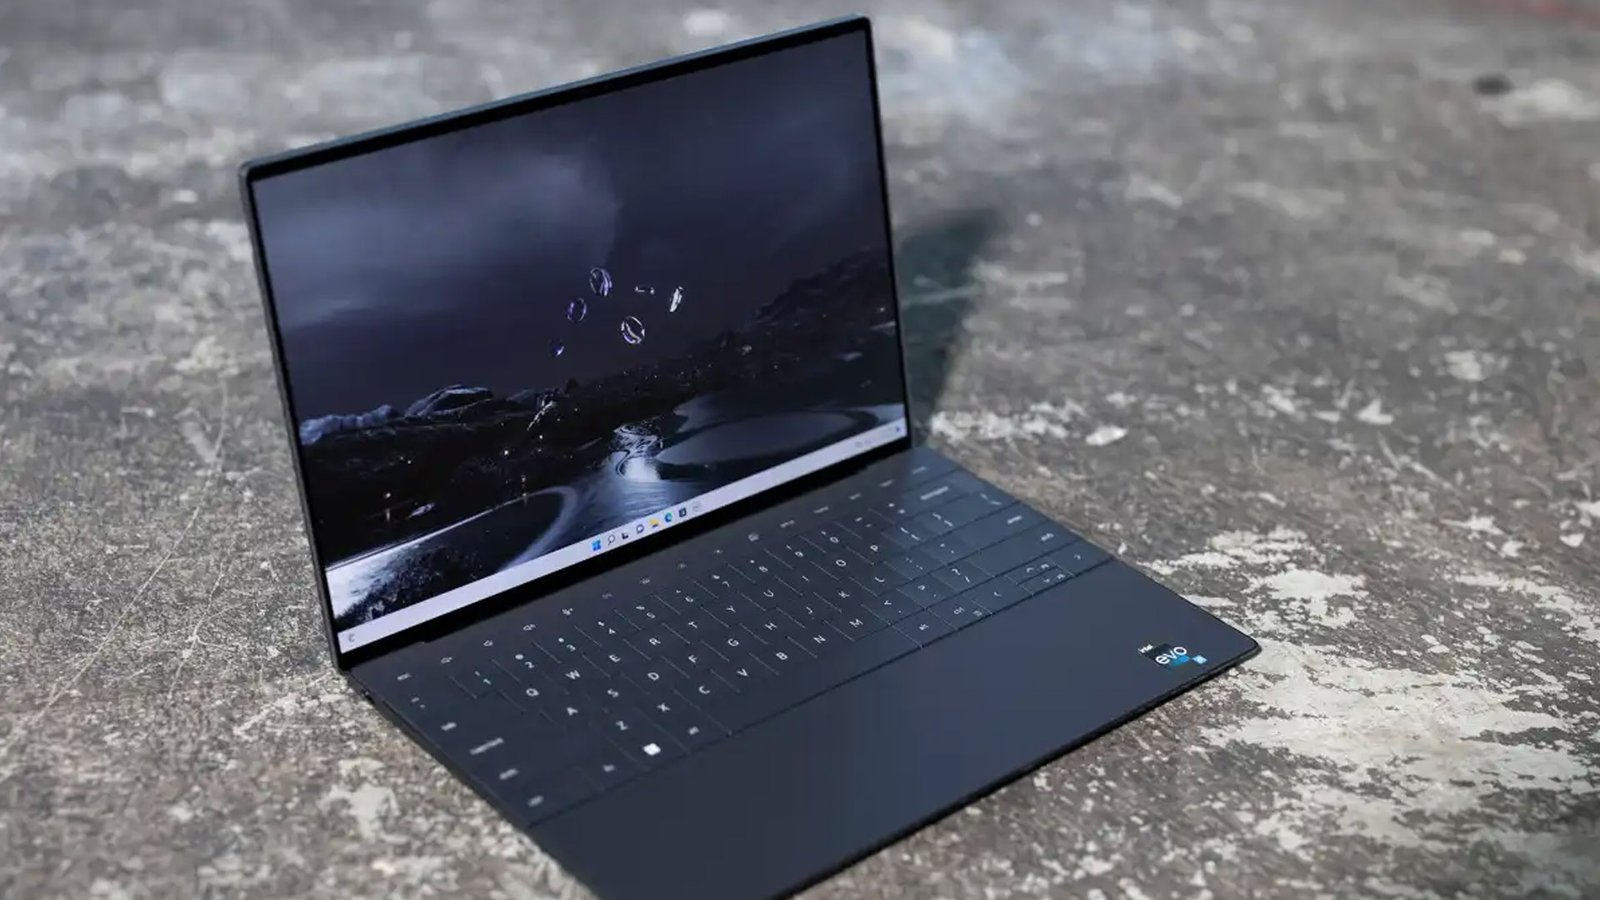 Dell XPS 13 Plus laptops are suffering excessive screen factors